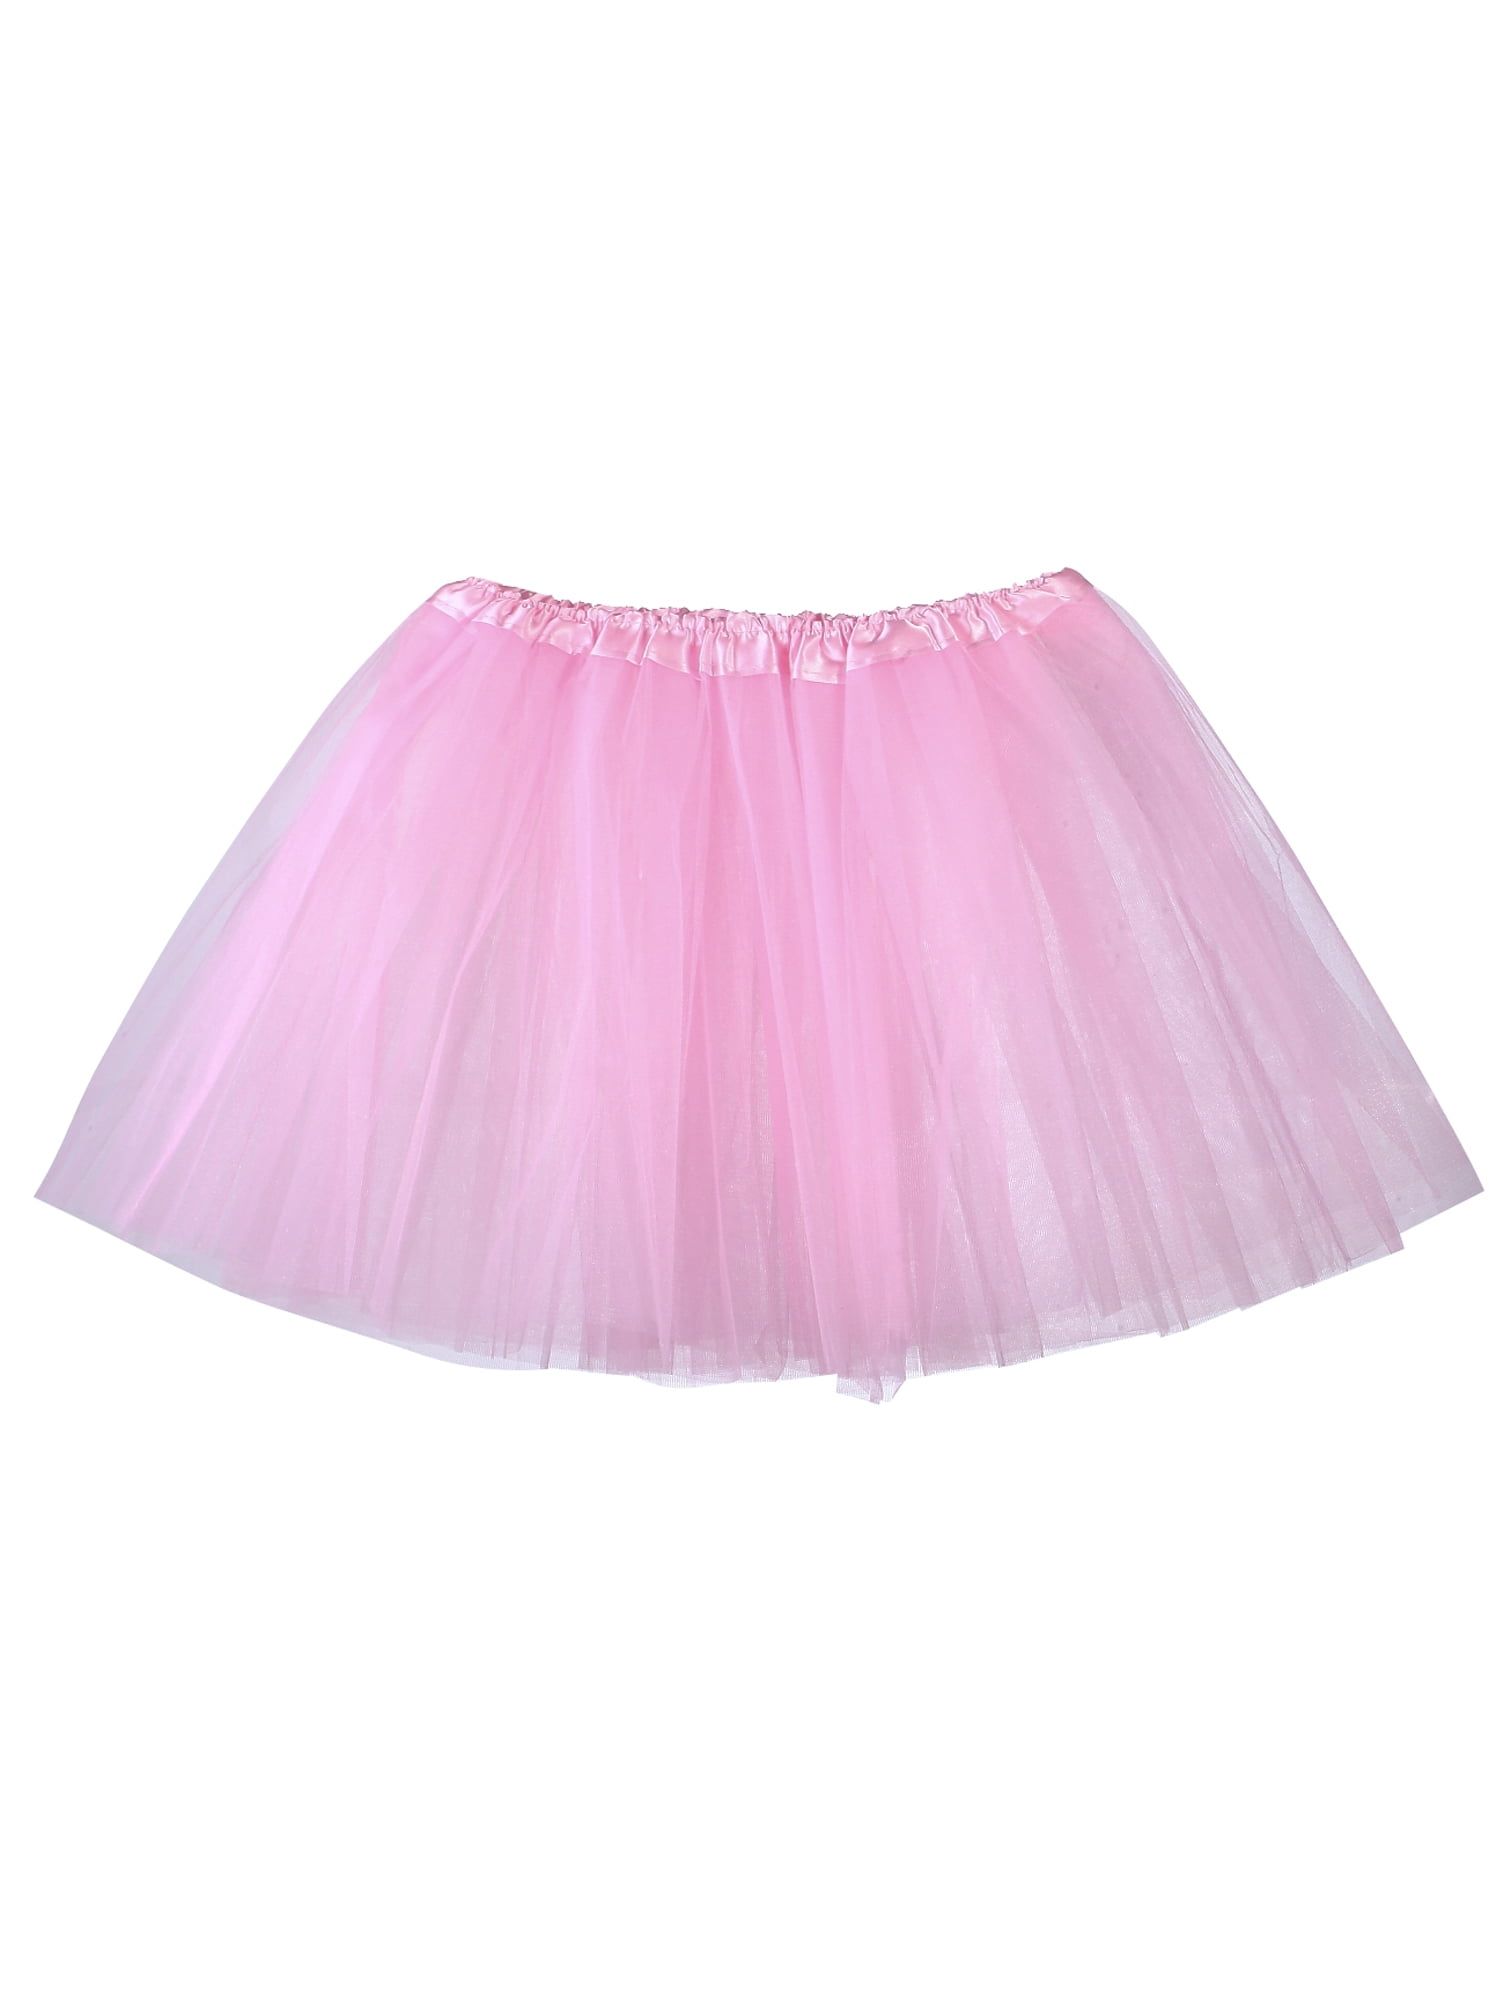 MERSARIPHY Women Solid Color Elastic Stretch Tulle Dress Tutu 3 Layer ...